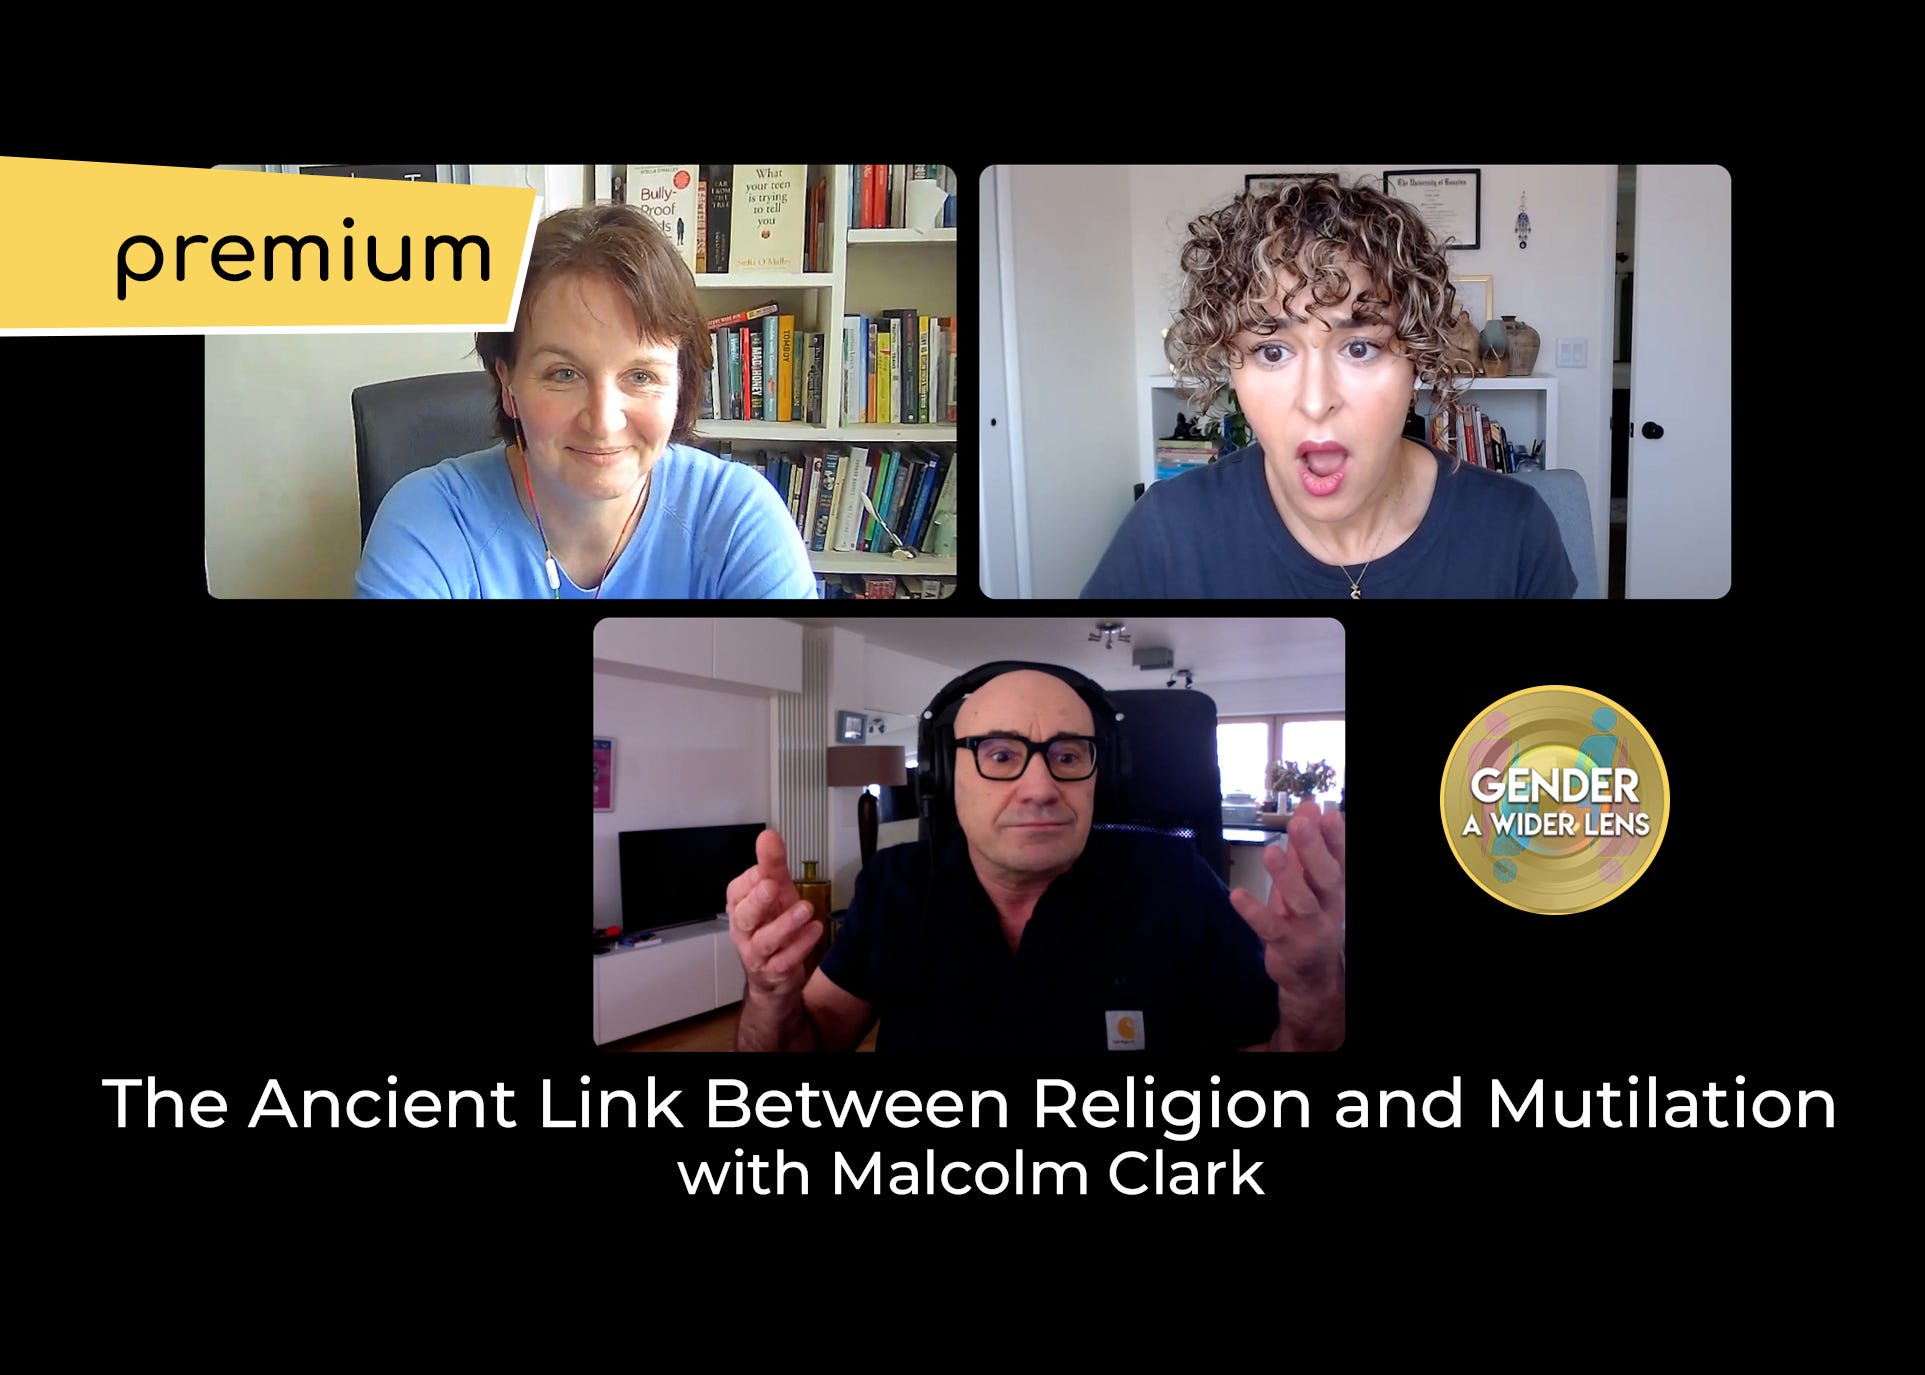 Premium: The Ancient Link Between Religion and Mutilation